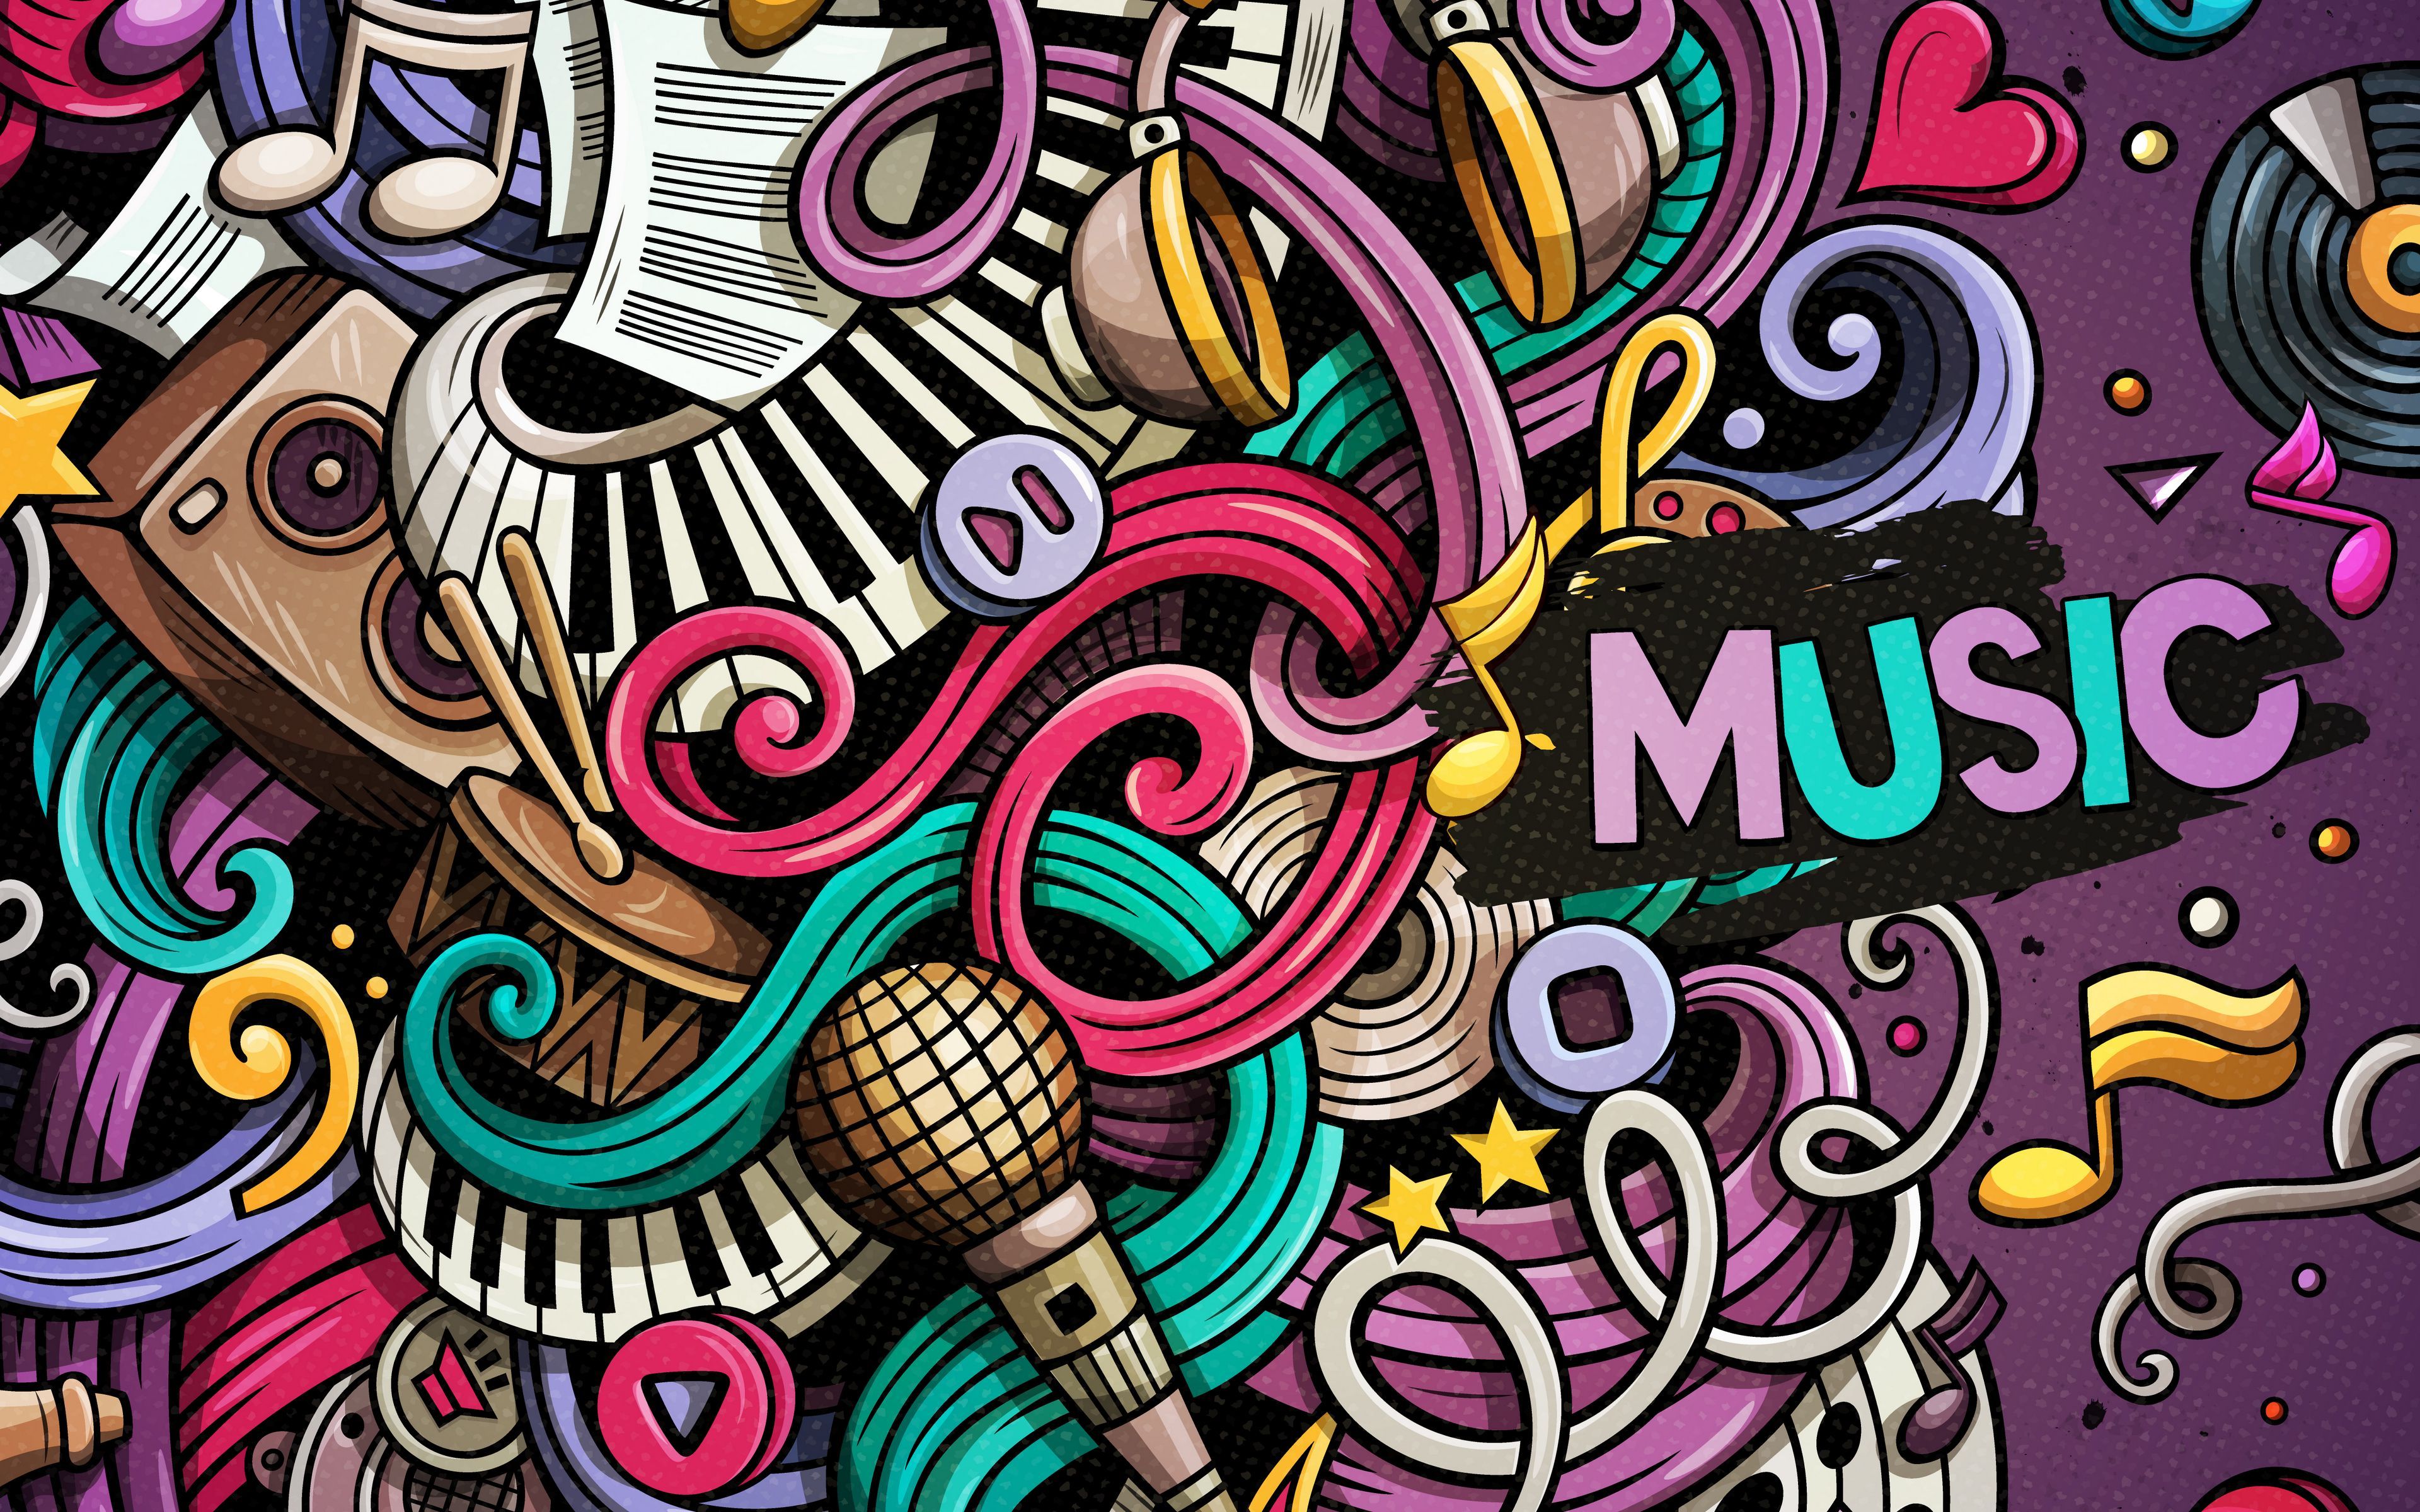 Download wallpaper 3840x2400 music, doodles, colorful, musical